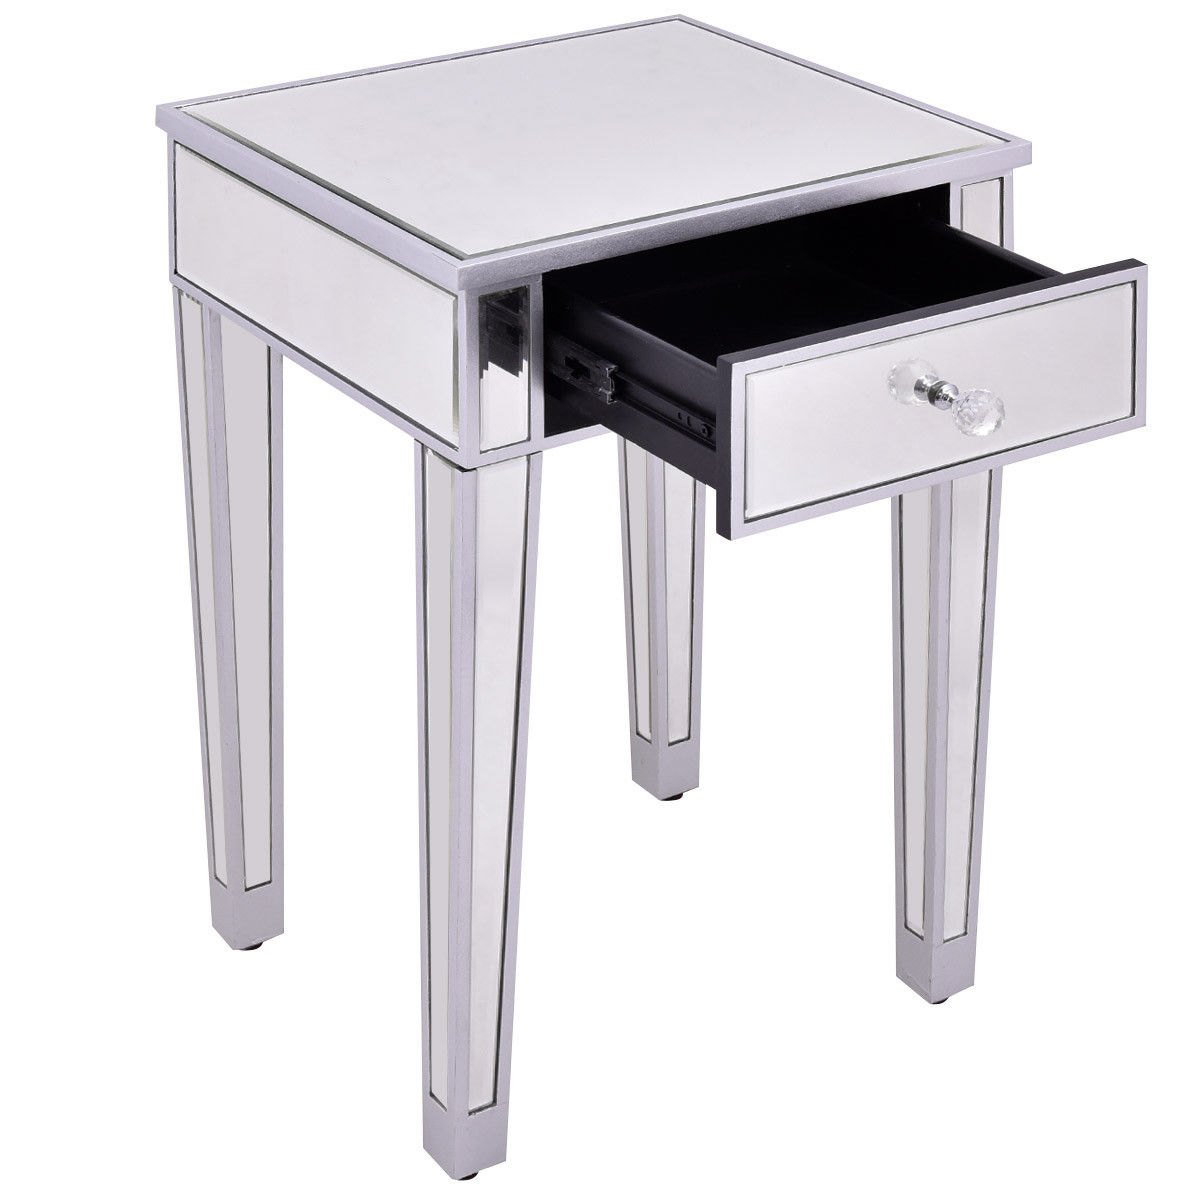 way mirrored accent table nightstand end bedside white storage cabinet drawer modern marble coffee patio lounger desk lamp living room sets swing cover lift top cool nightstands